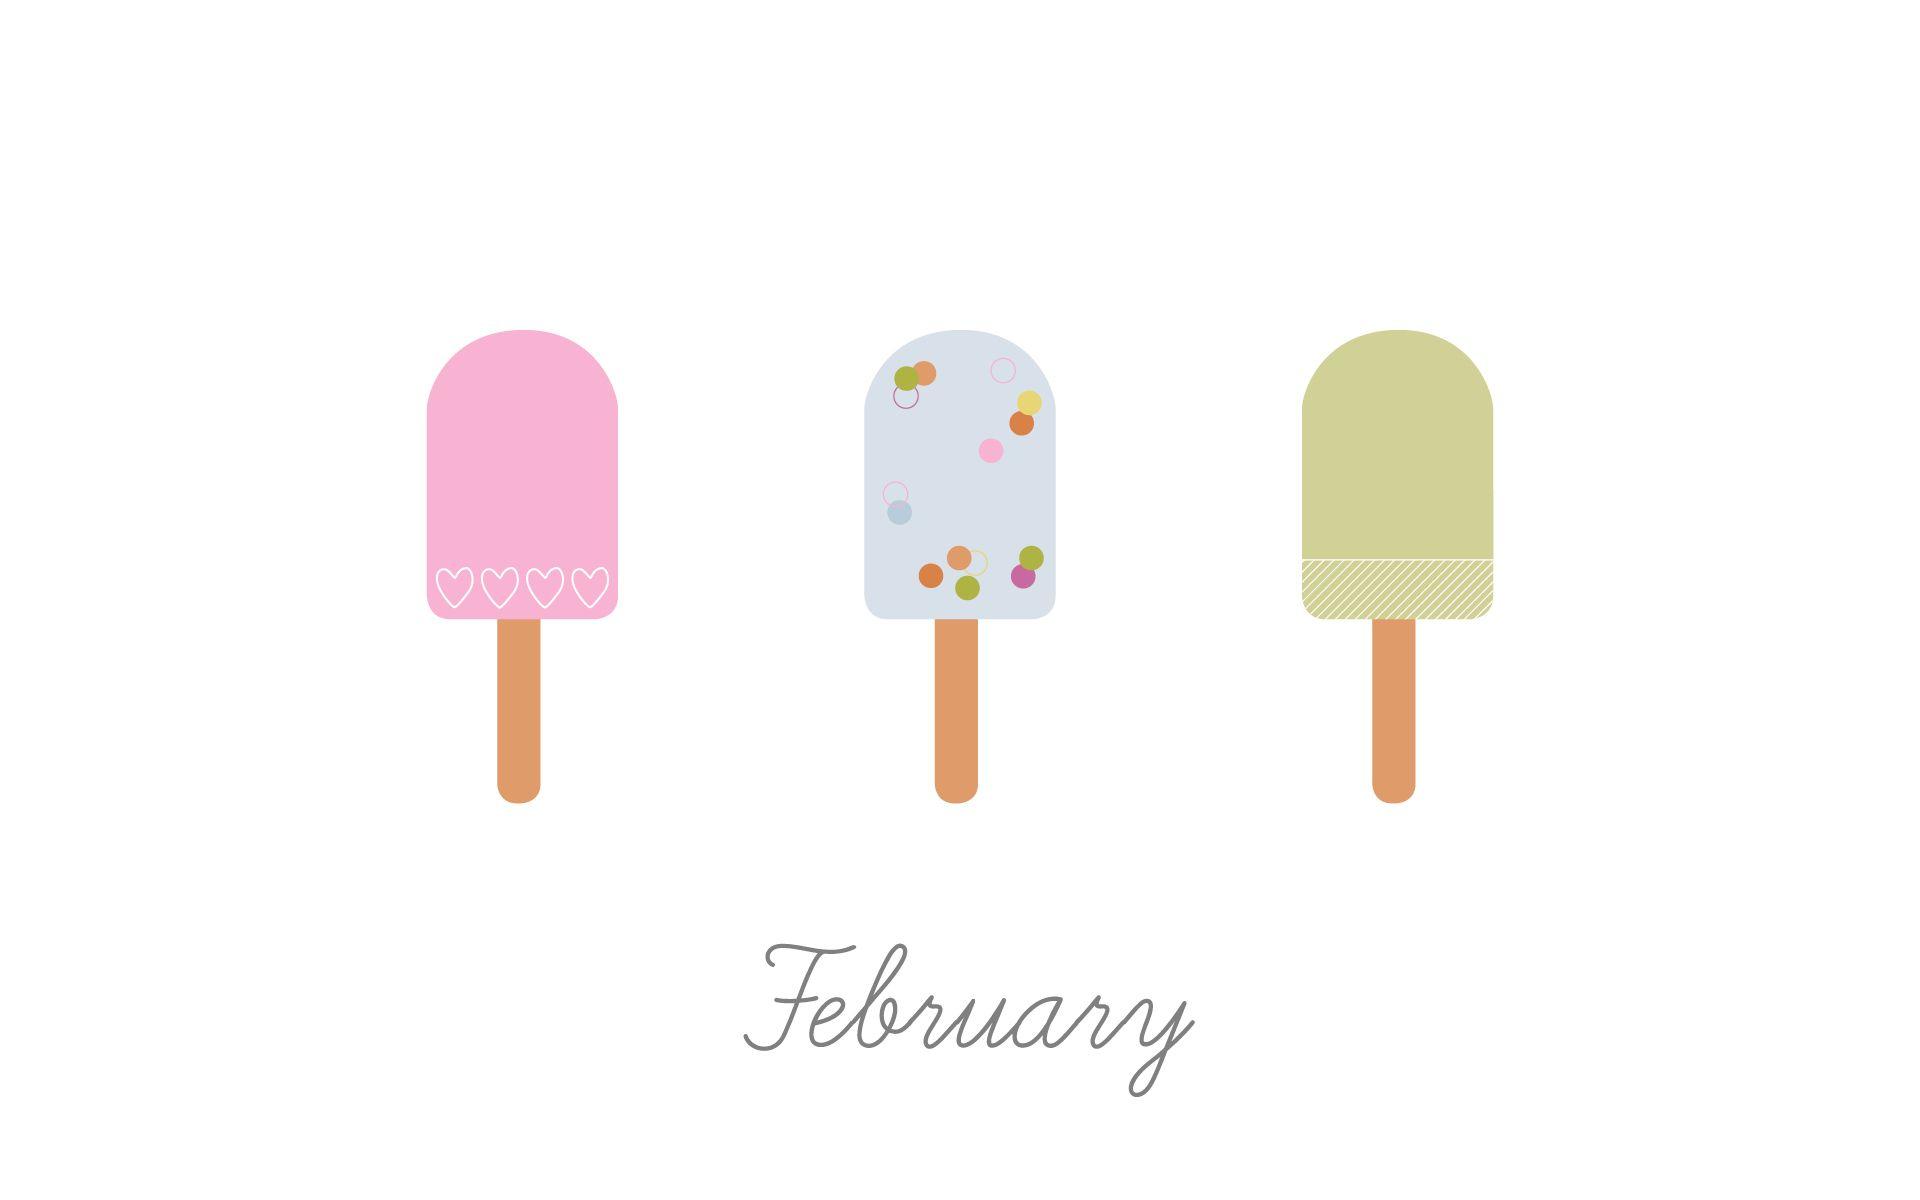 Free February Wallpaper, toodlesnoodles